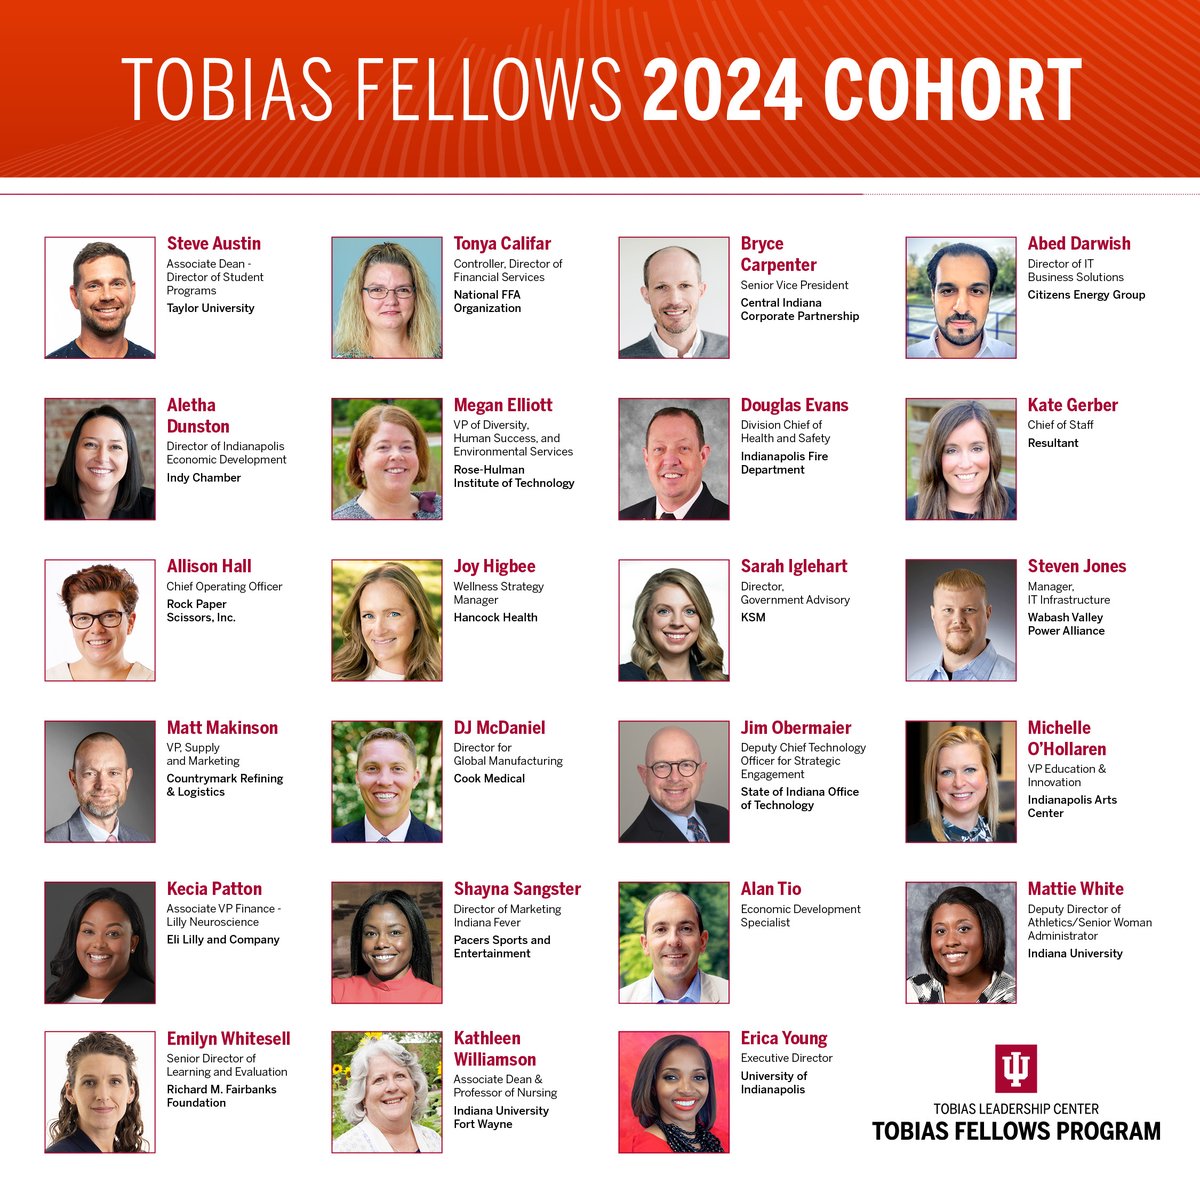 We're proud to introduce the 19th class of Tobias Fellows, a remarkable group of high-talent, seasoned leaders committed to enhancing their leadership skills. Discover more about this cohort & exclusive program: bit.ly/3HoWQB1 #LeadershipExcellence #TobiasFellows2024